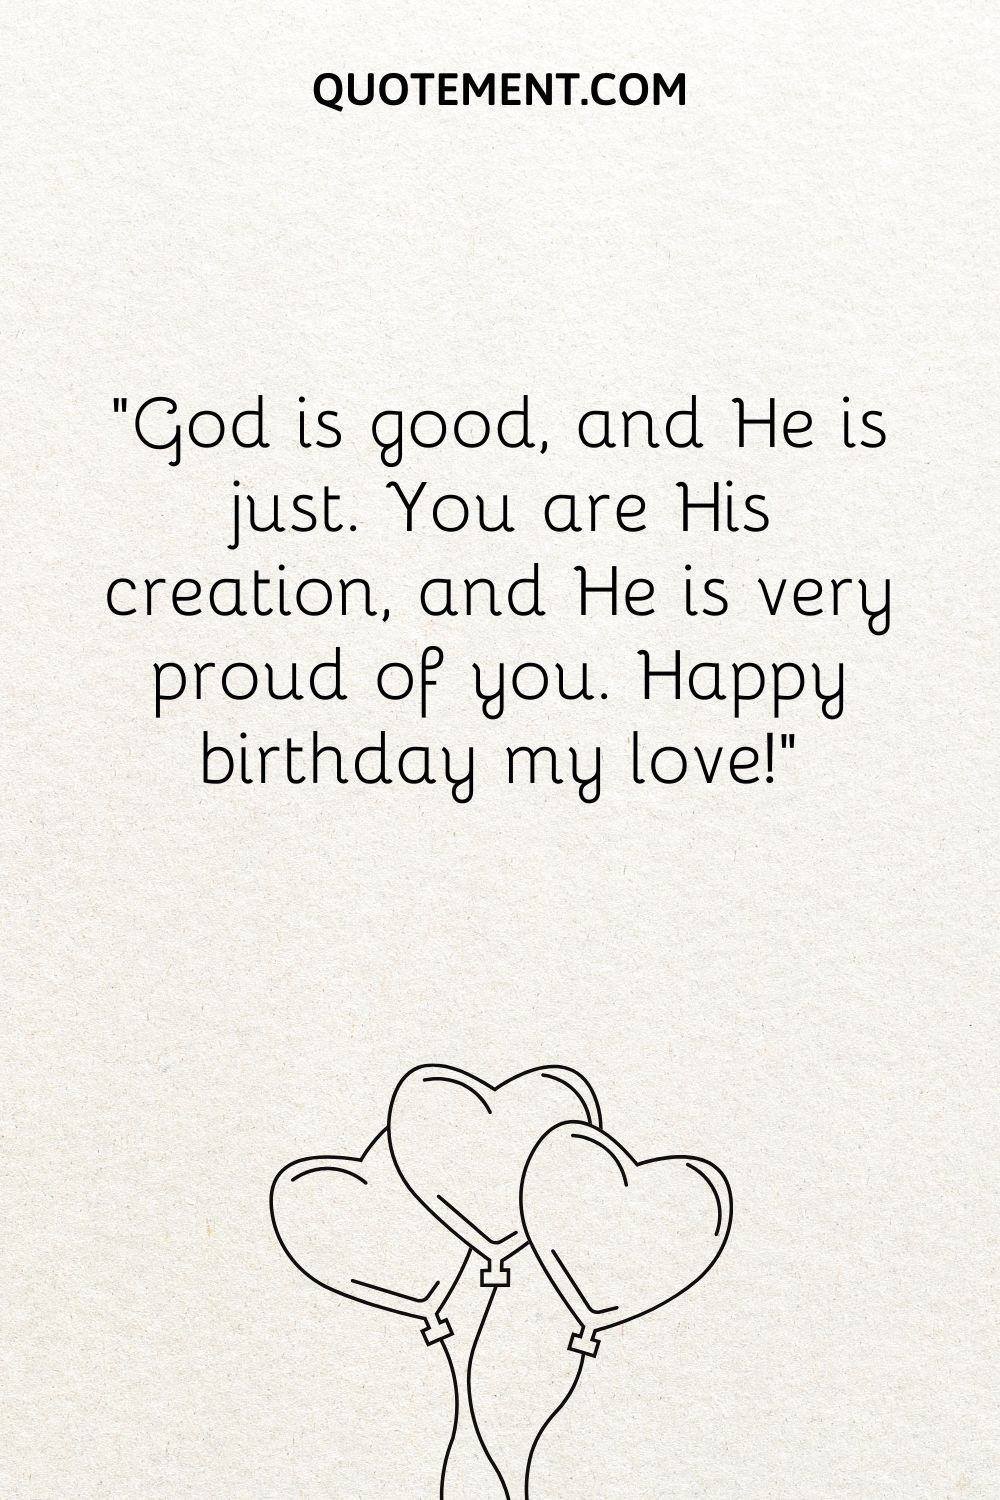 God is good, and He is just. You are His creation, and He is very proud of you. Happy birthday my love!